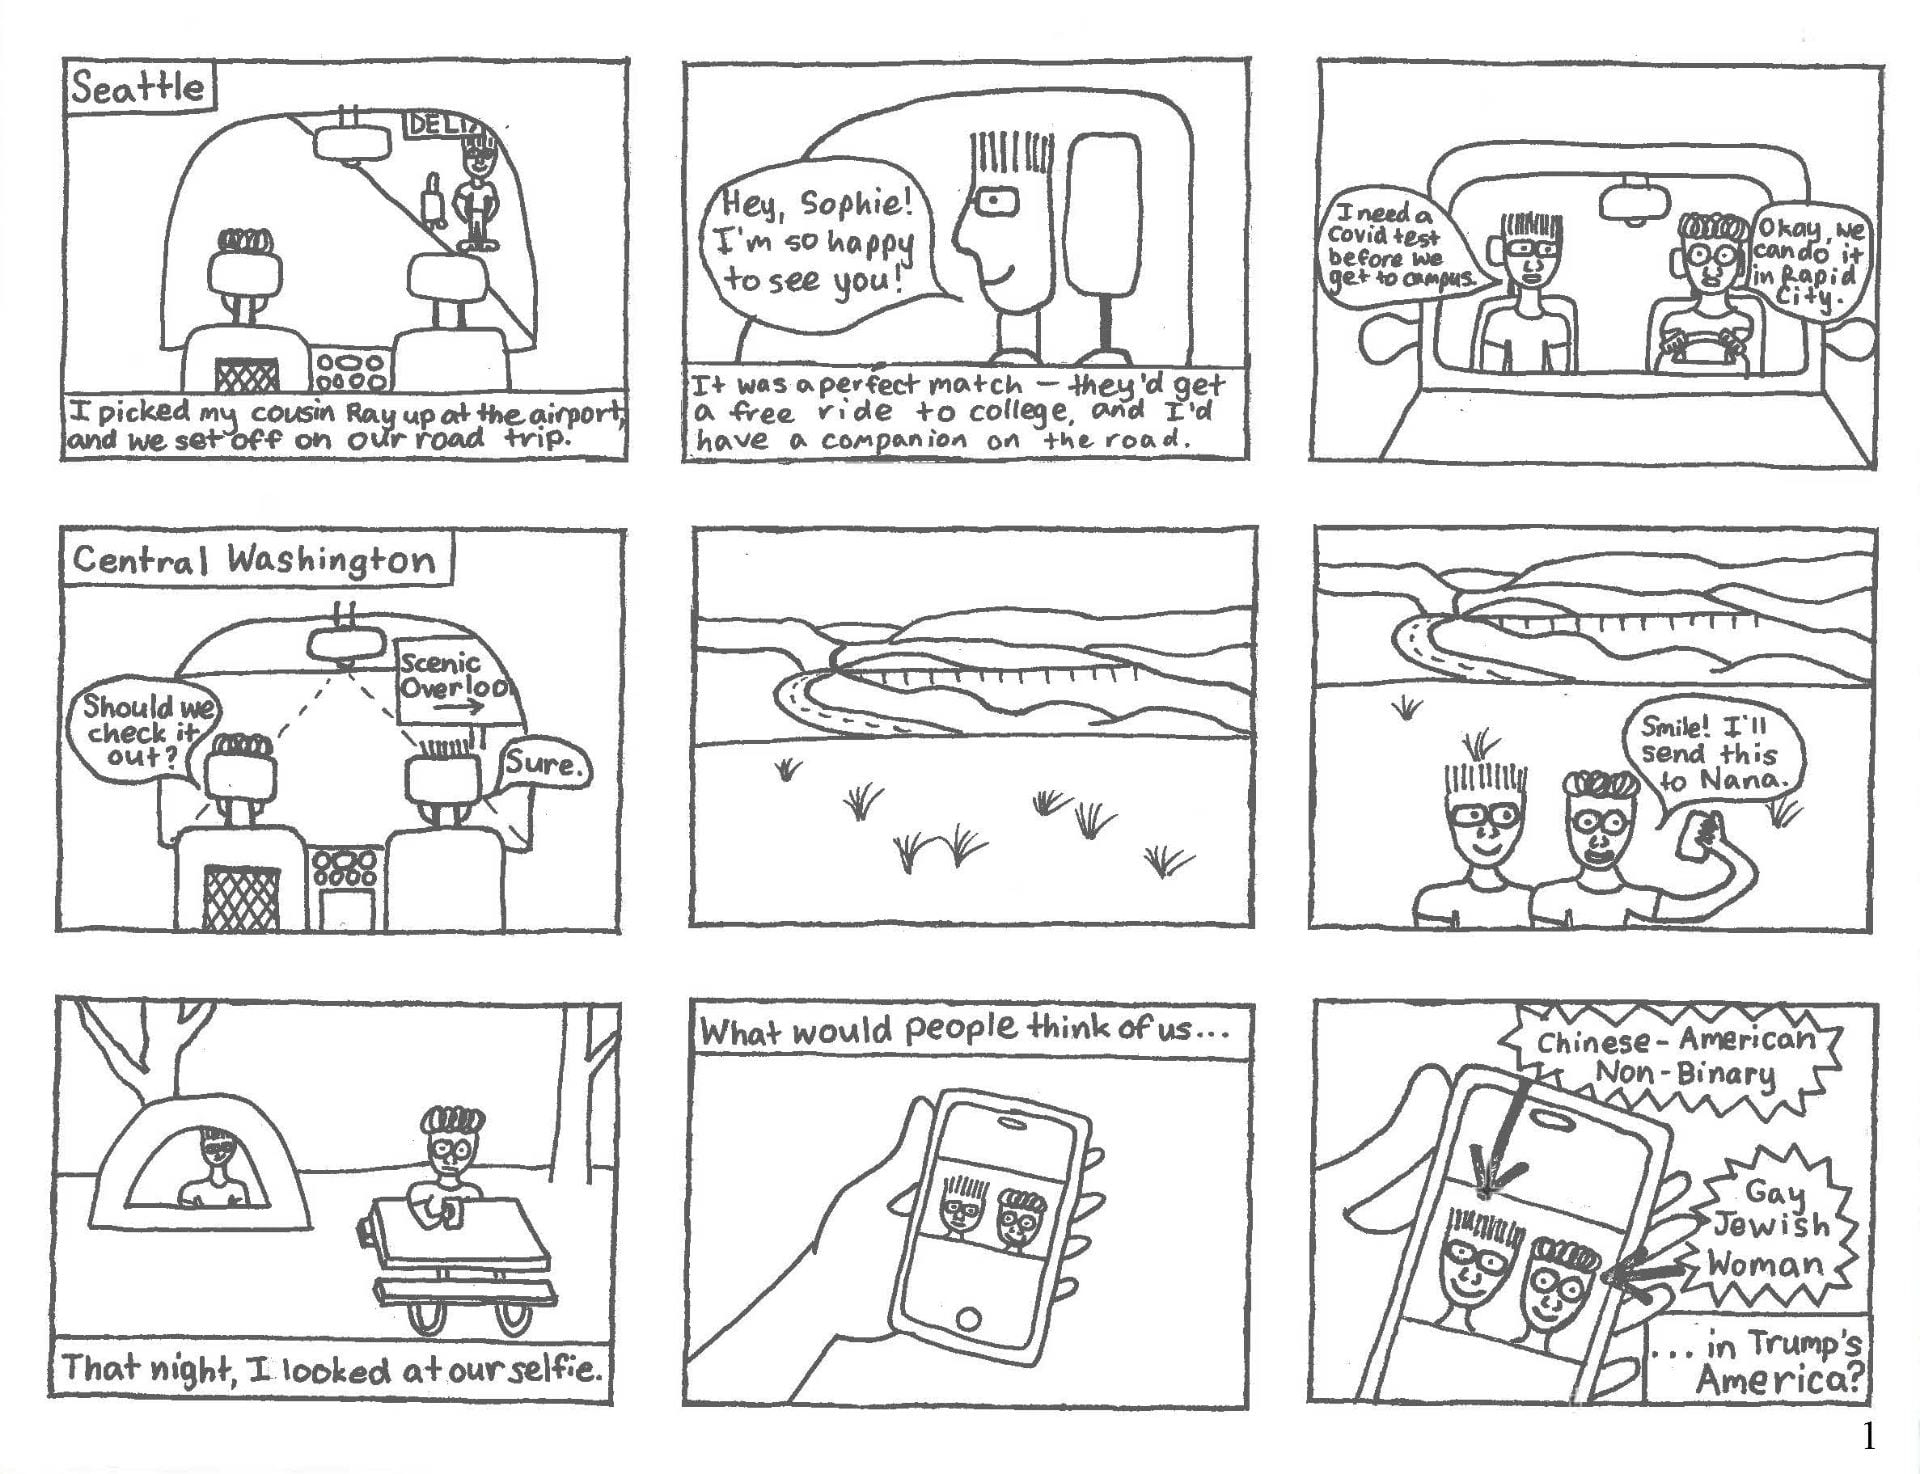 S. Frank - Comic Page 1 - Our main characters start a road trip in Seattle, and take a selfie, and one character reflects on the statement of simply taking that selfie of the people they are.